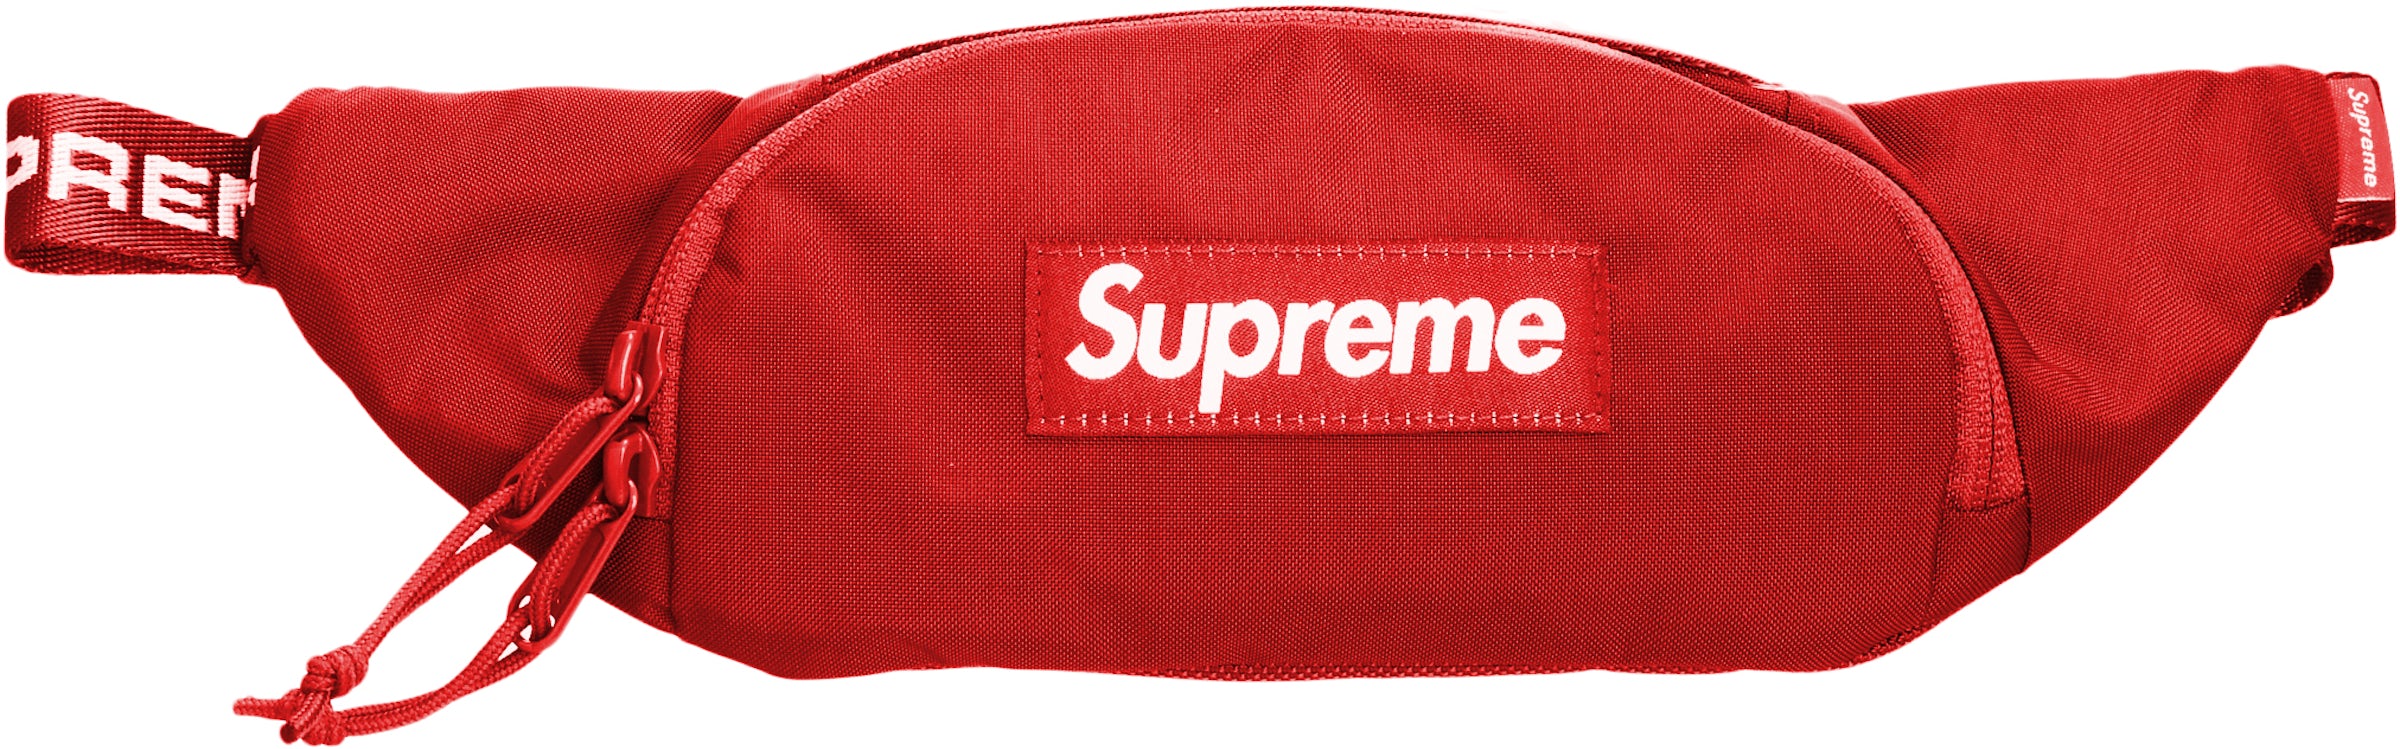 Supreme Waist Bag Fanny Pack Red Adjustable Multi Pocket Zip New without  Tag